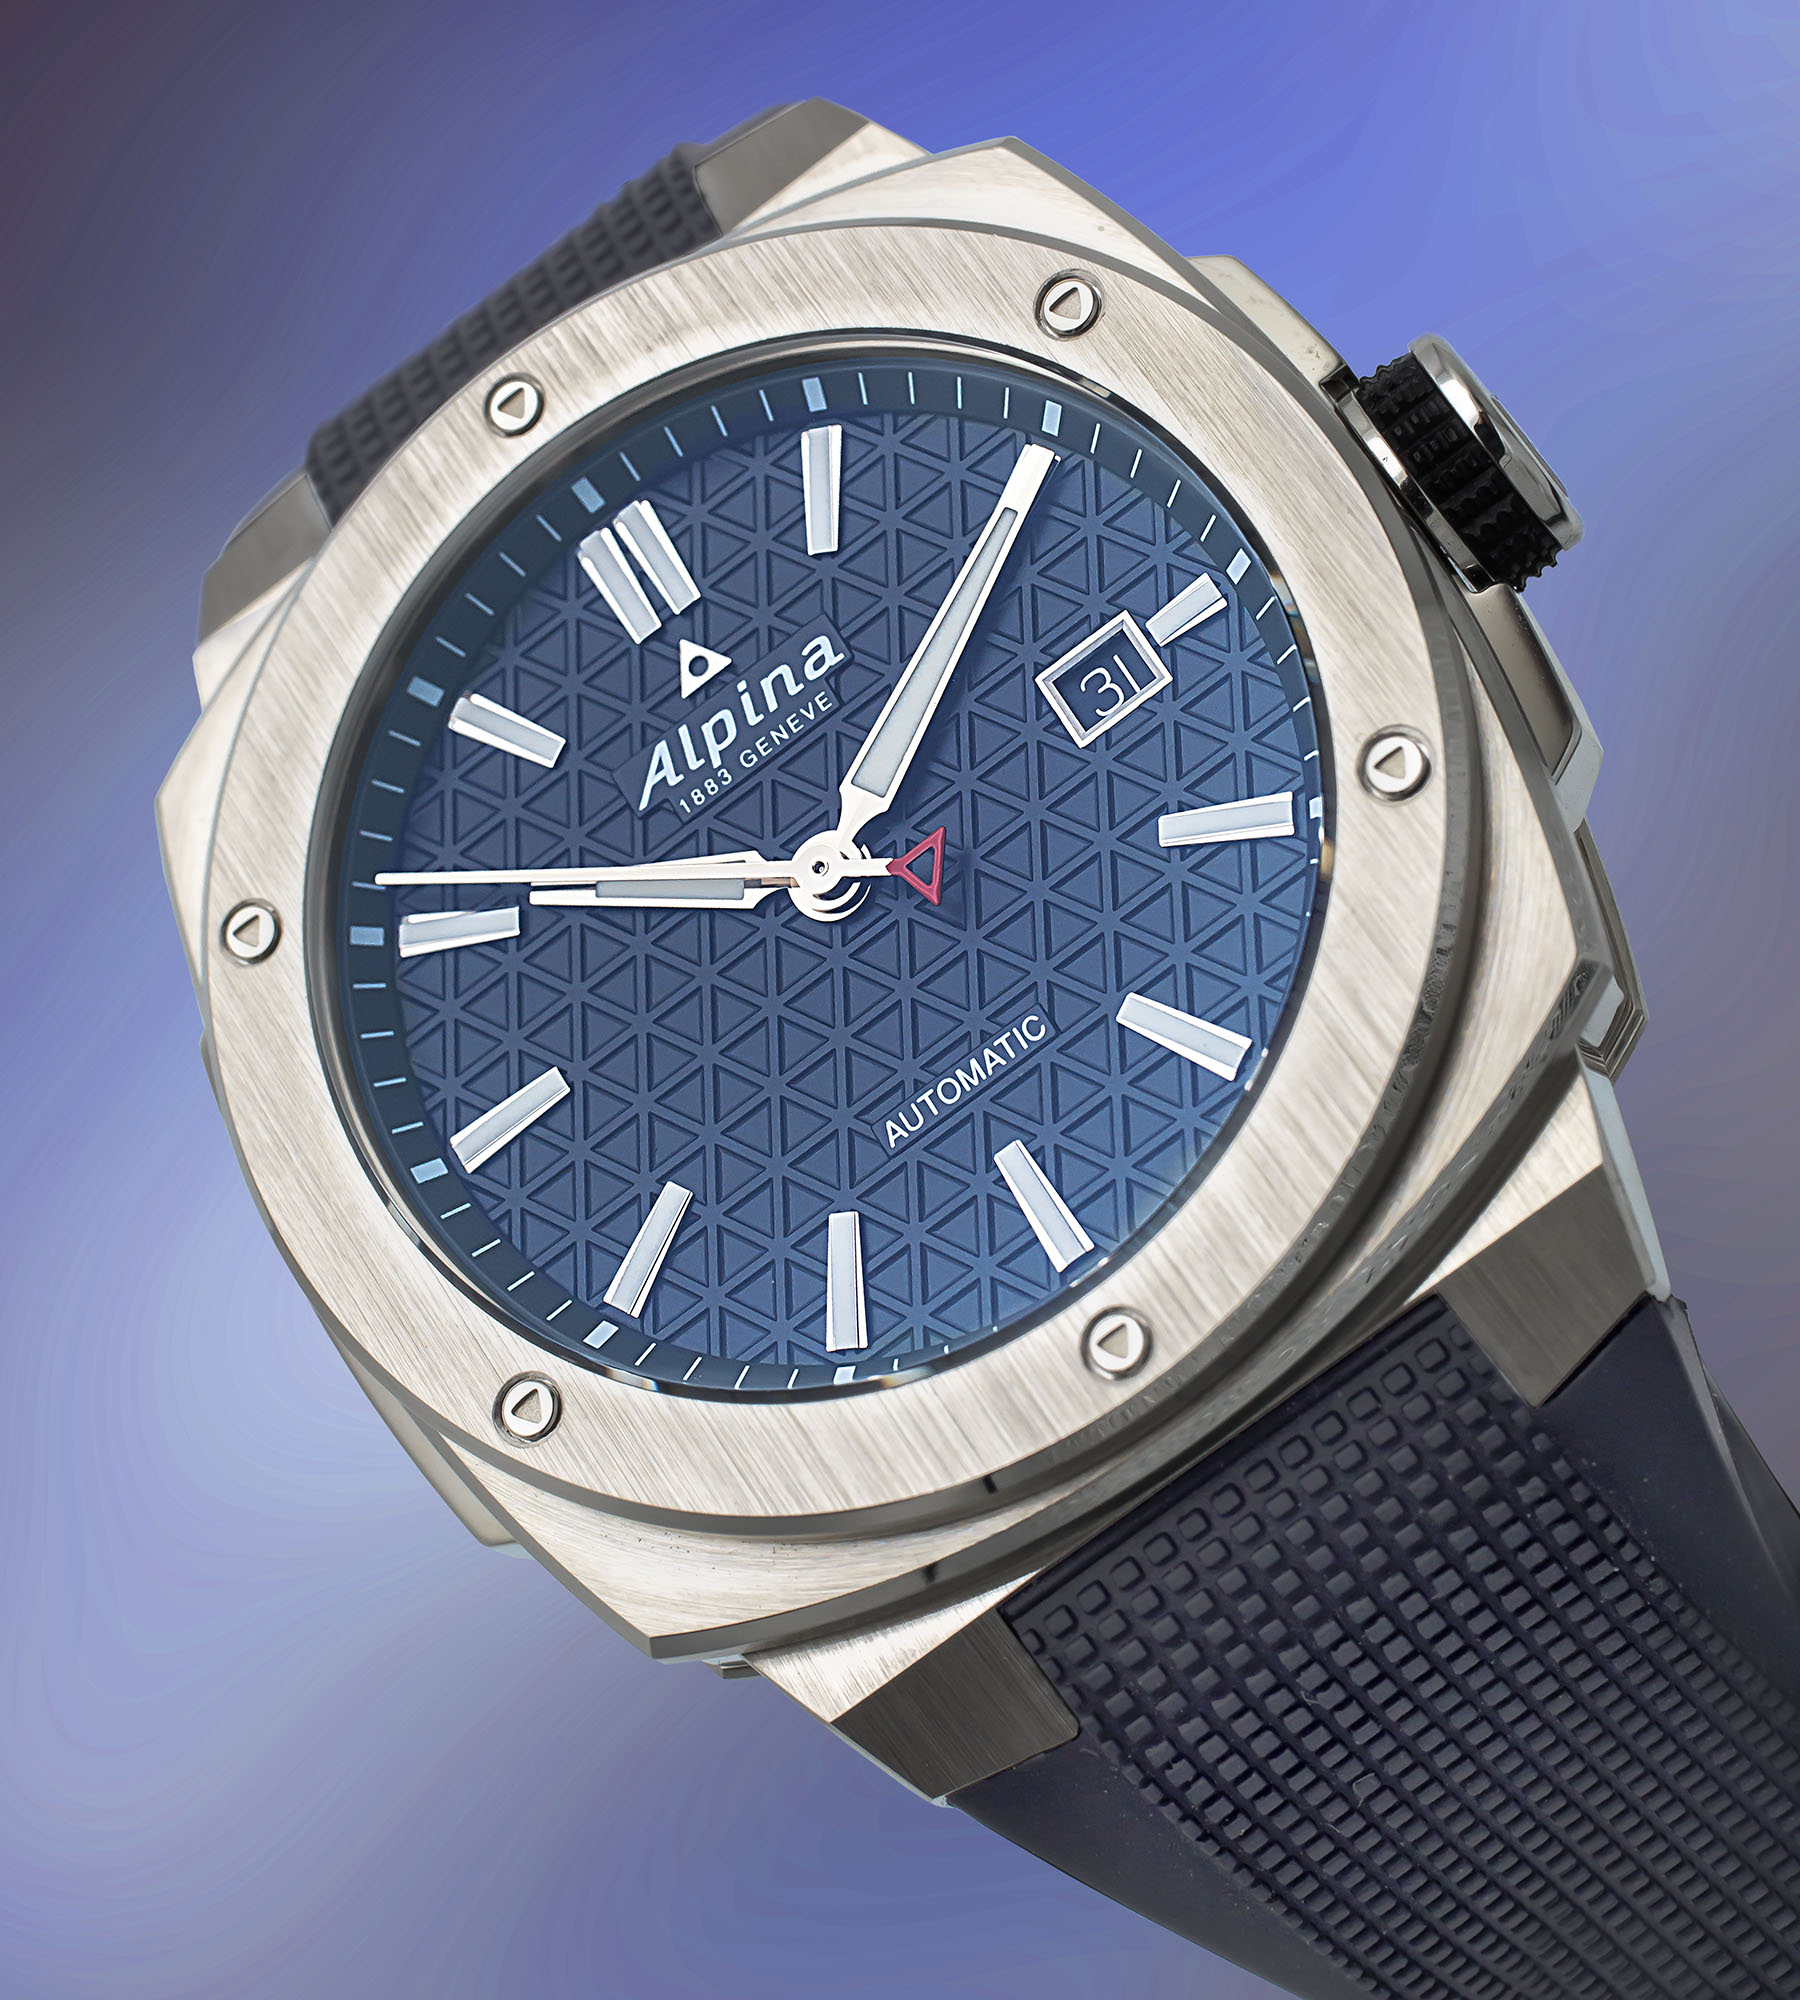 Alpina Reinvents An Outdoor Icon With The Alpiner Extreme Automatic Watch  Line | aBlogtoWatch